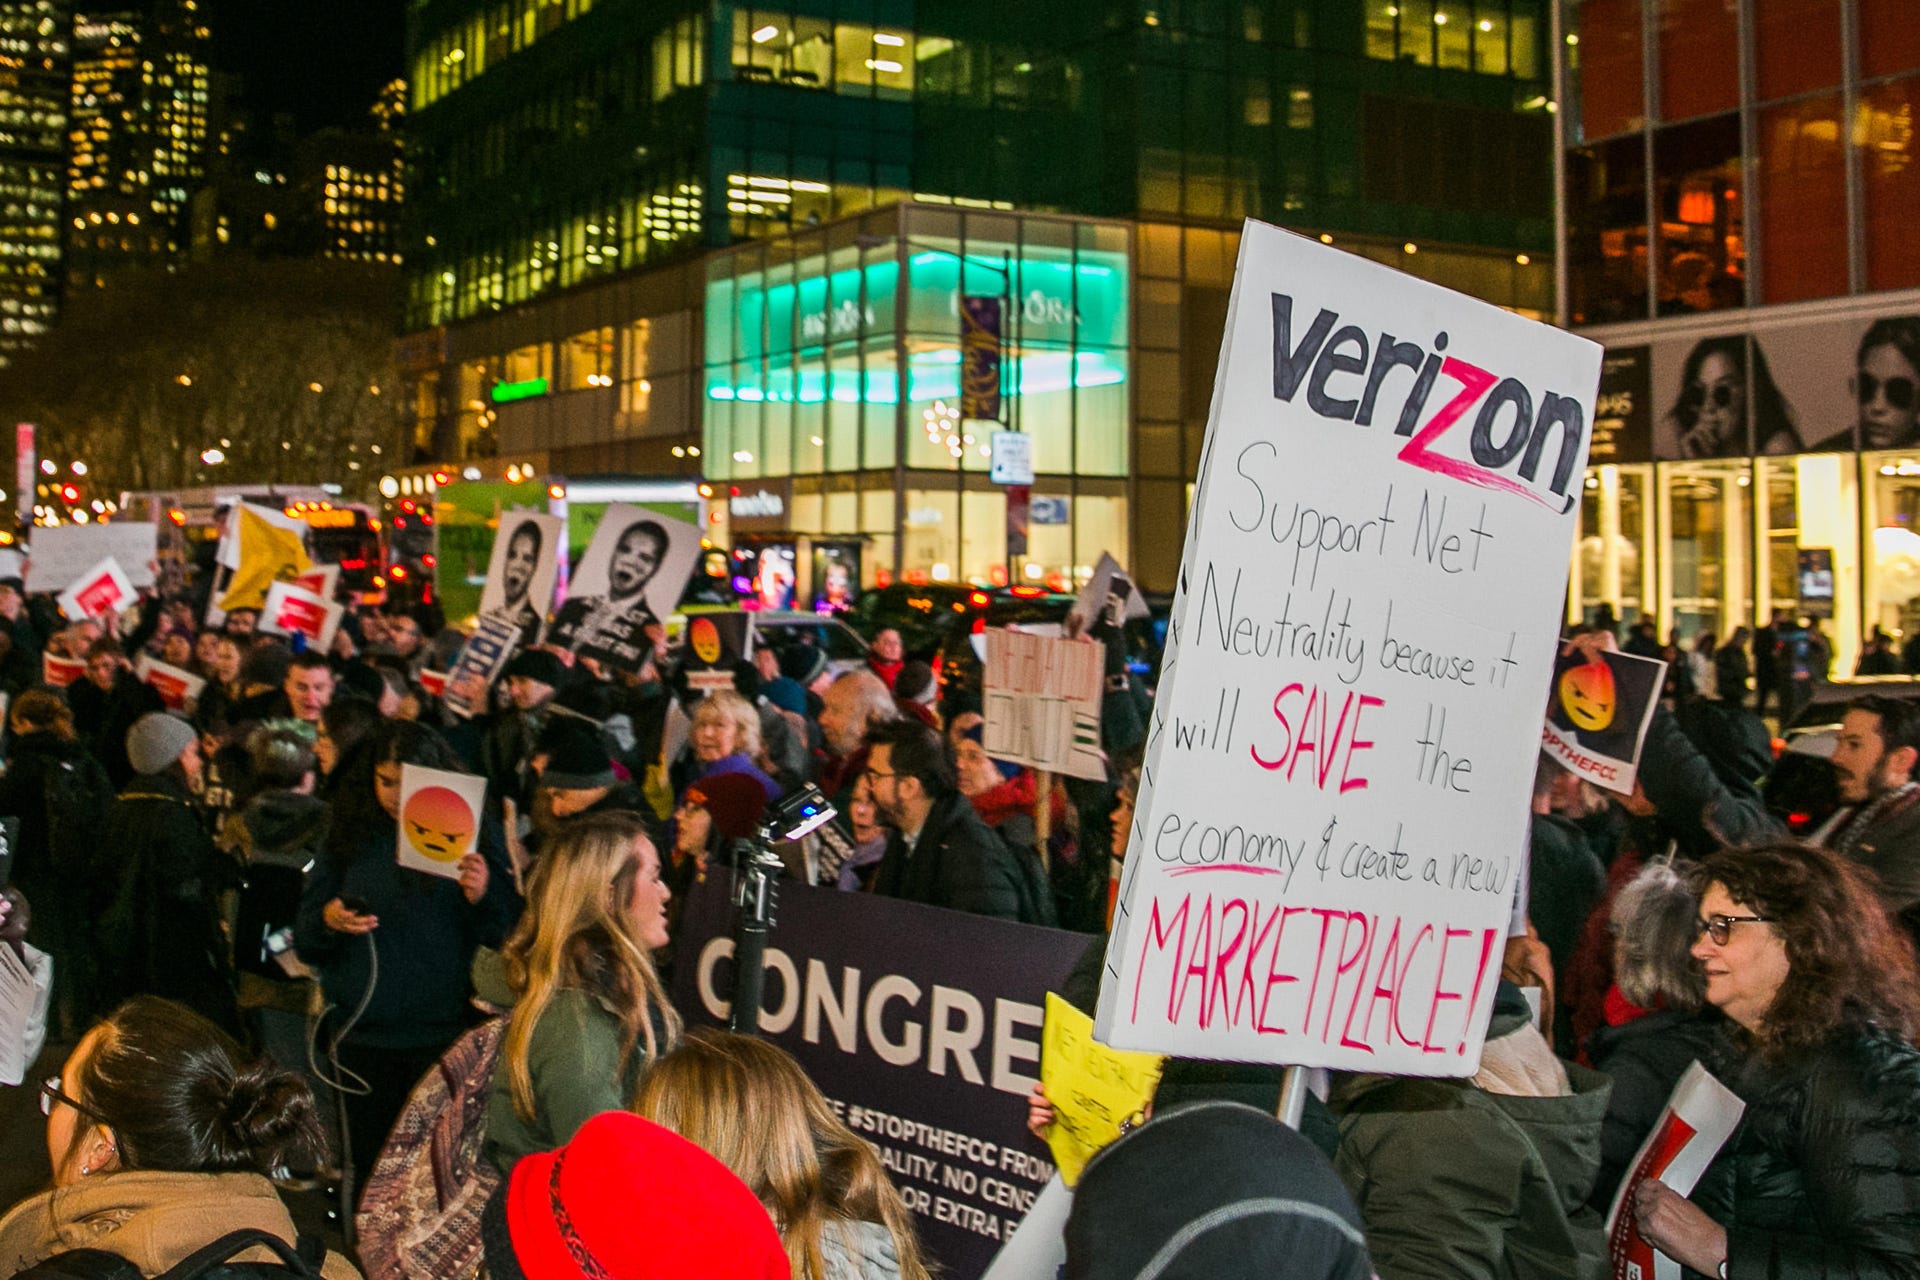 Net neutrality protest at a Verizon store in New York City.